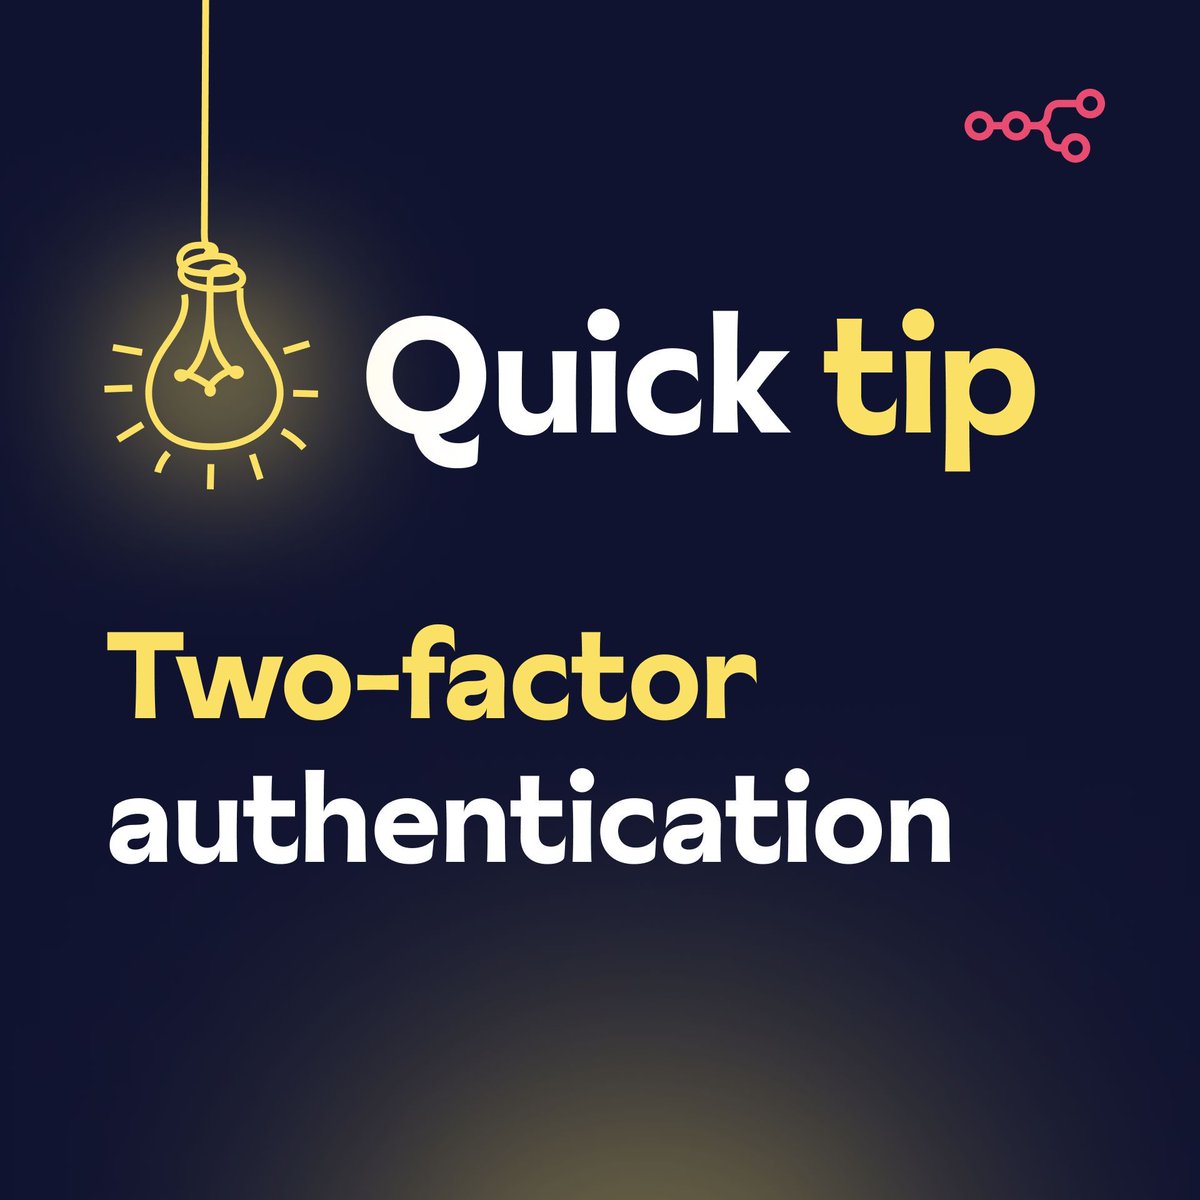 n8n quick tip: Enable Two-factor authentication (2FA) on your account today for additional security! 2FA is available on all plans. buff.ly/3HBUUoZ #n8n-tips #automation #security